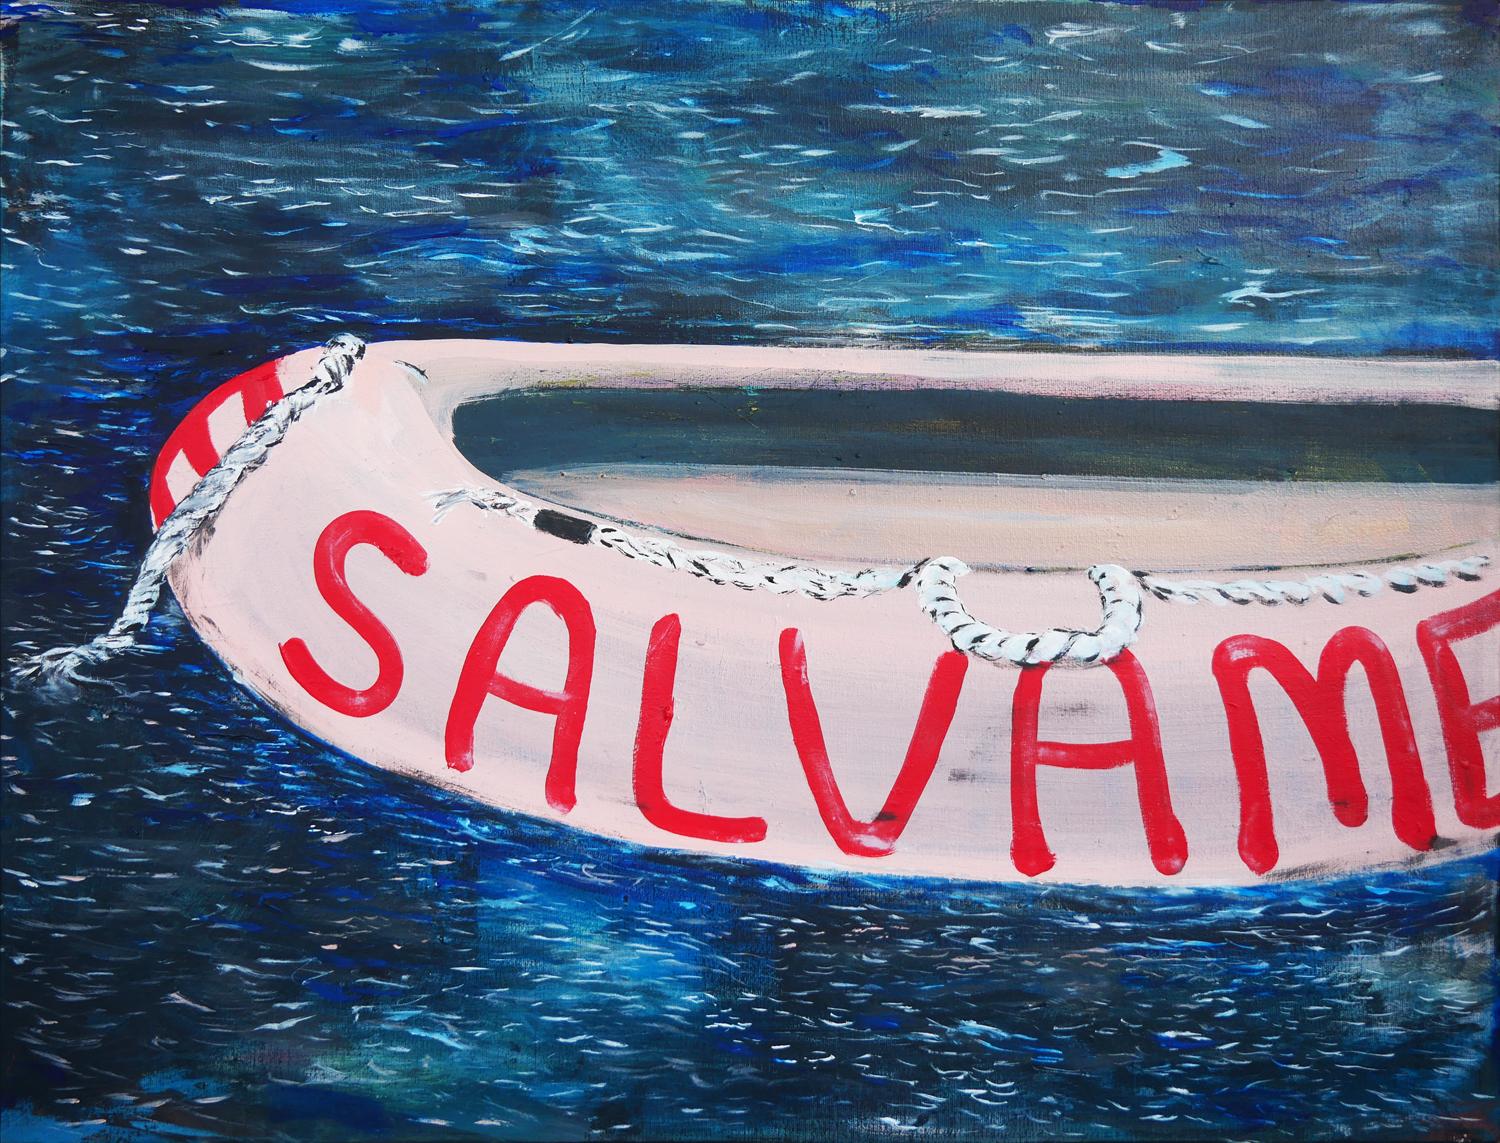 Moisés Villafuerte Abstract Painting - "Salvame" Blue, Pink, and Red Abstract Contemporary Seascape Painting with Texts